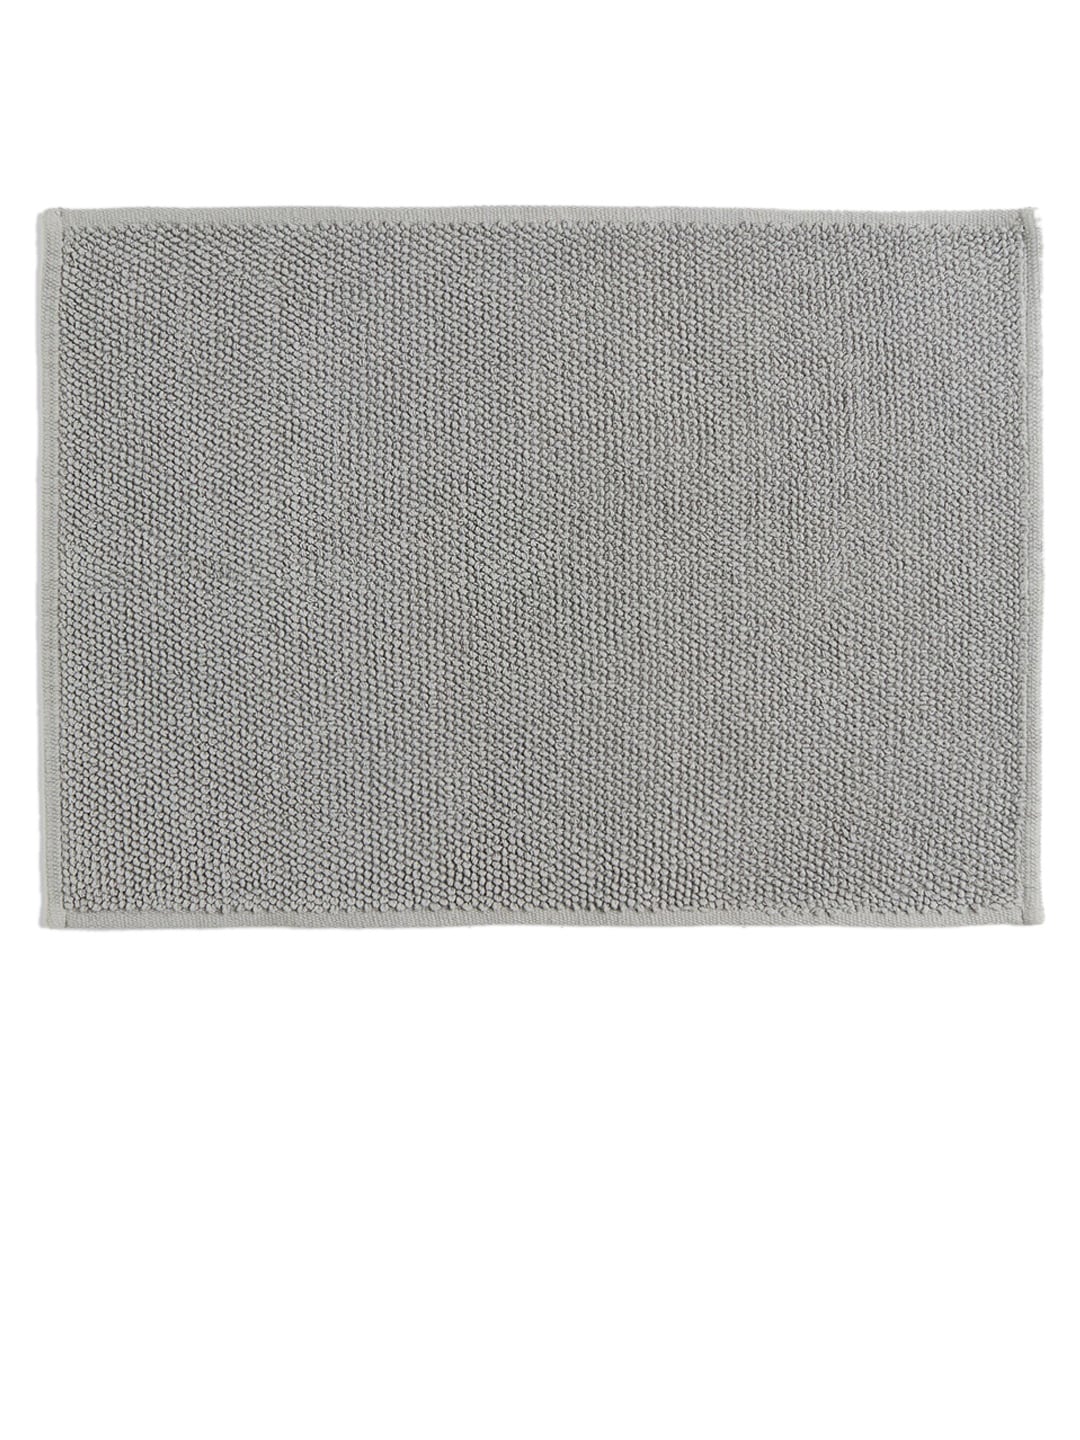 H&M Grey Solid Cotton Bath Mat Price in India